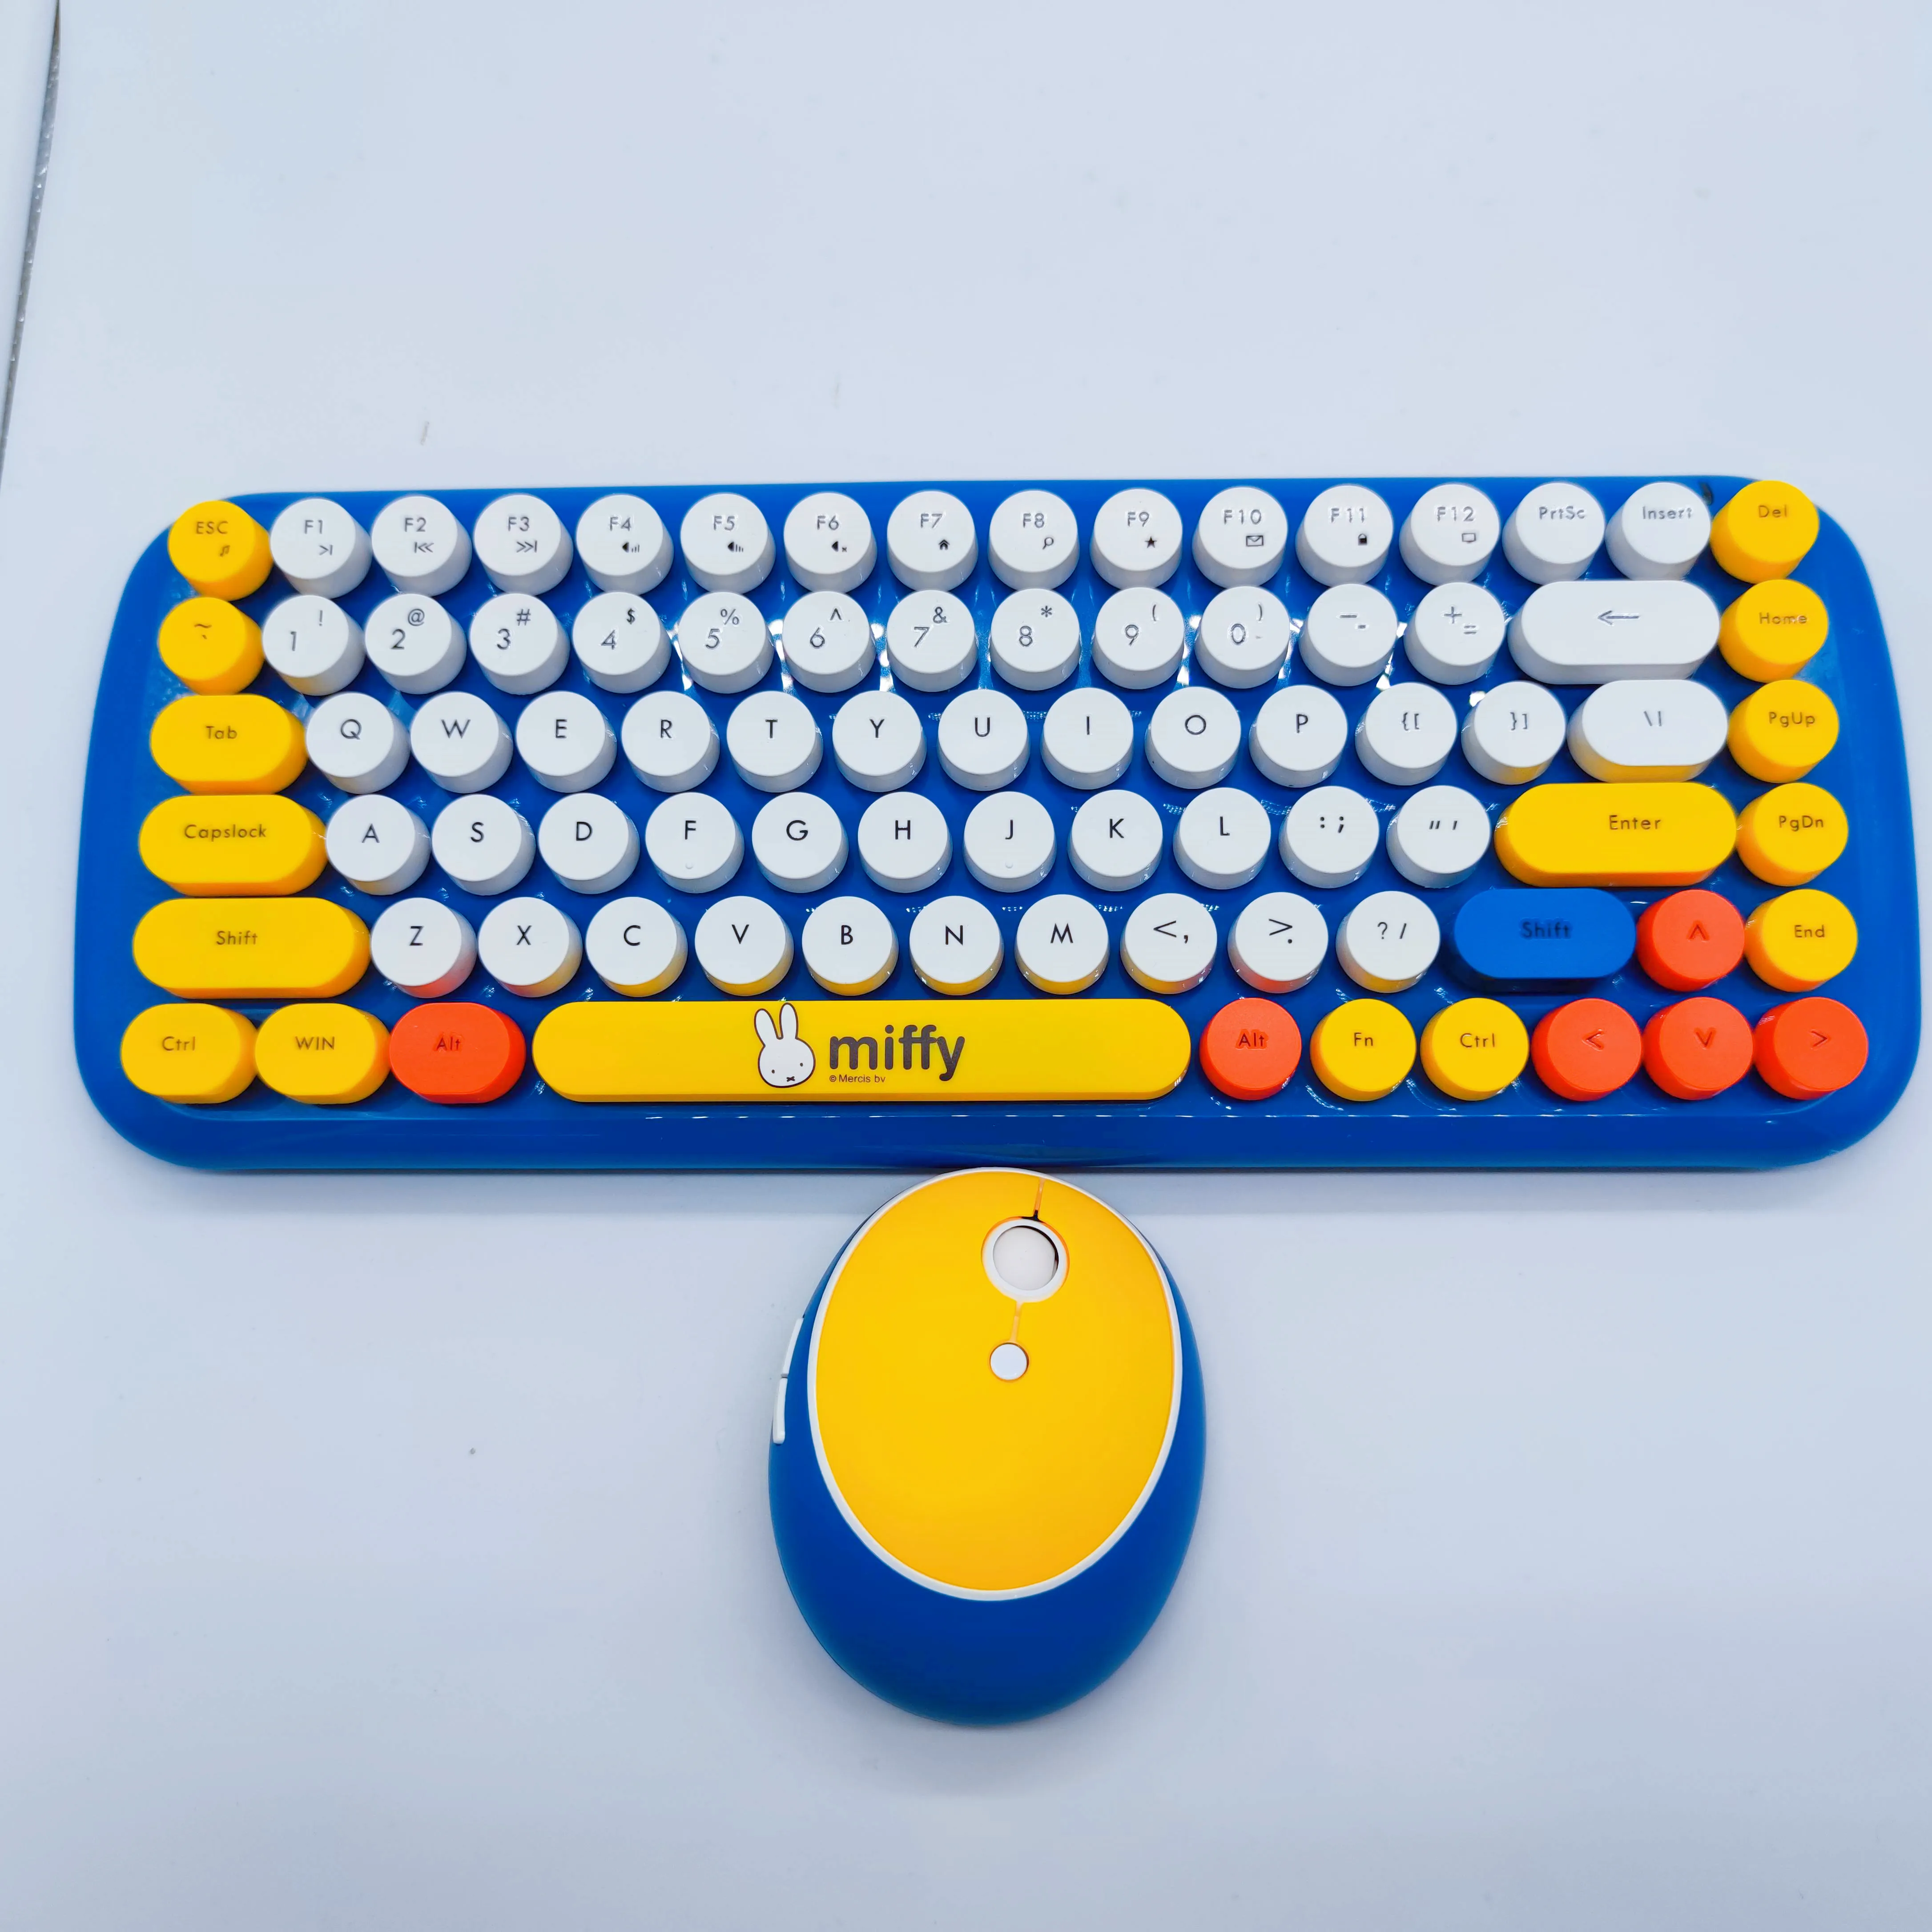 

2022 Miffy is a bestse magic mini mechanic case cover with set combo wireless gaming and mouse combos mouse pads keyboards